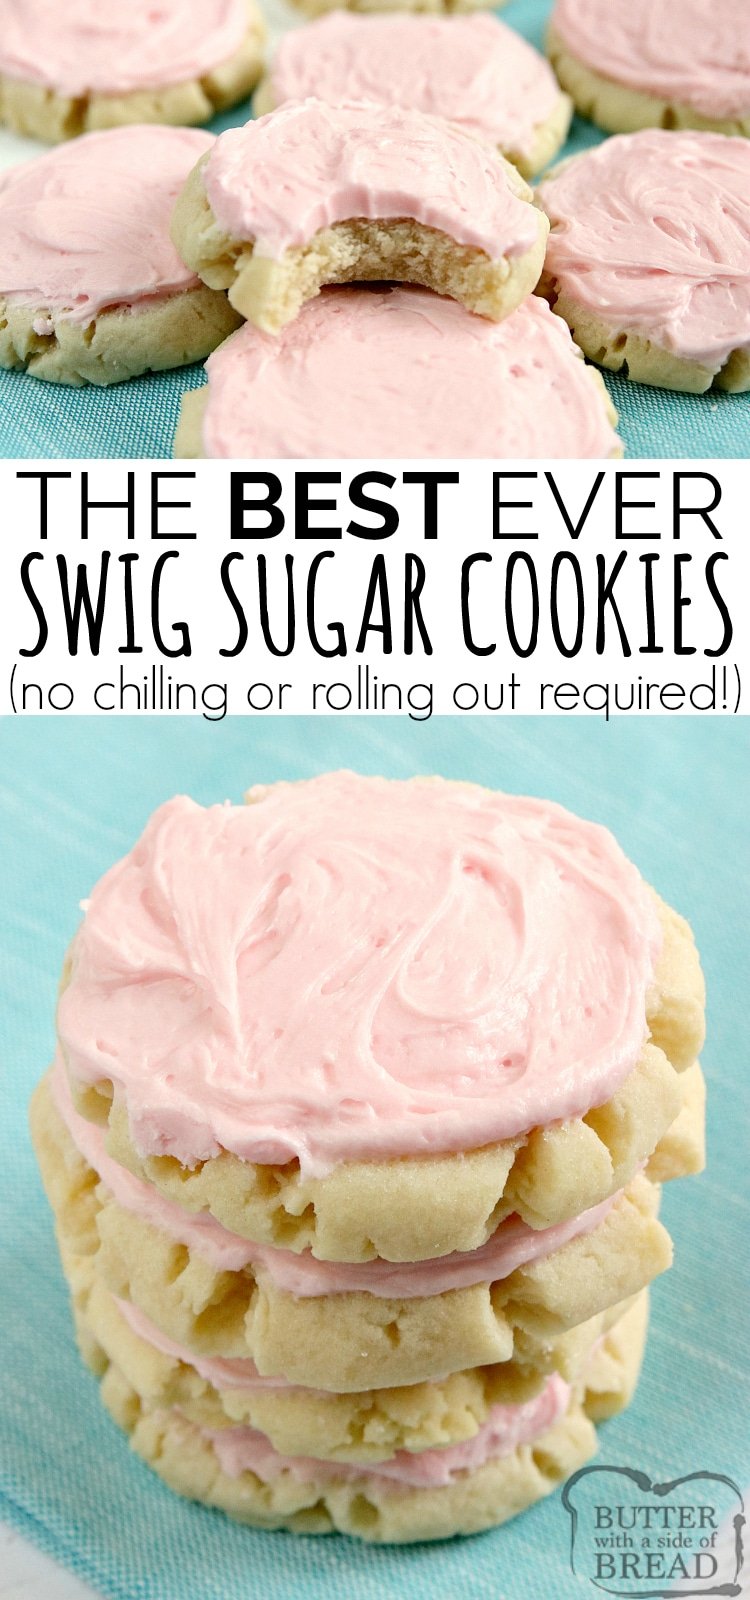 Copycat Swig Sugar Cookies are buttery, soft and somewhere in between a sugar cookie and shortbread, with a little bit of delicious frosting on top! This sugar cookie recipe doesn't require any chilling and you don't have to roll them out either! The best copycat Swig cookie recipe that I've ever tried!